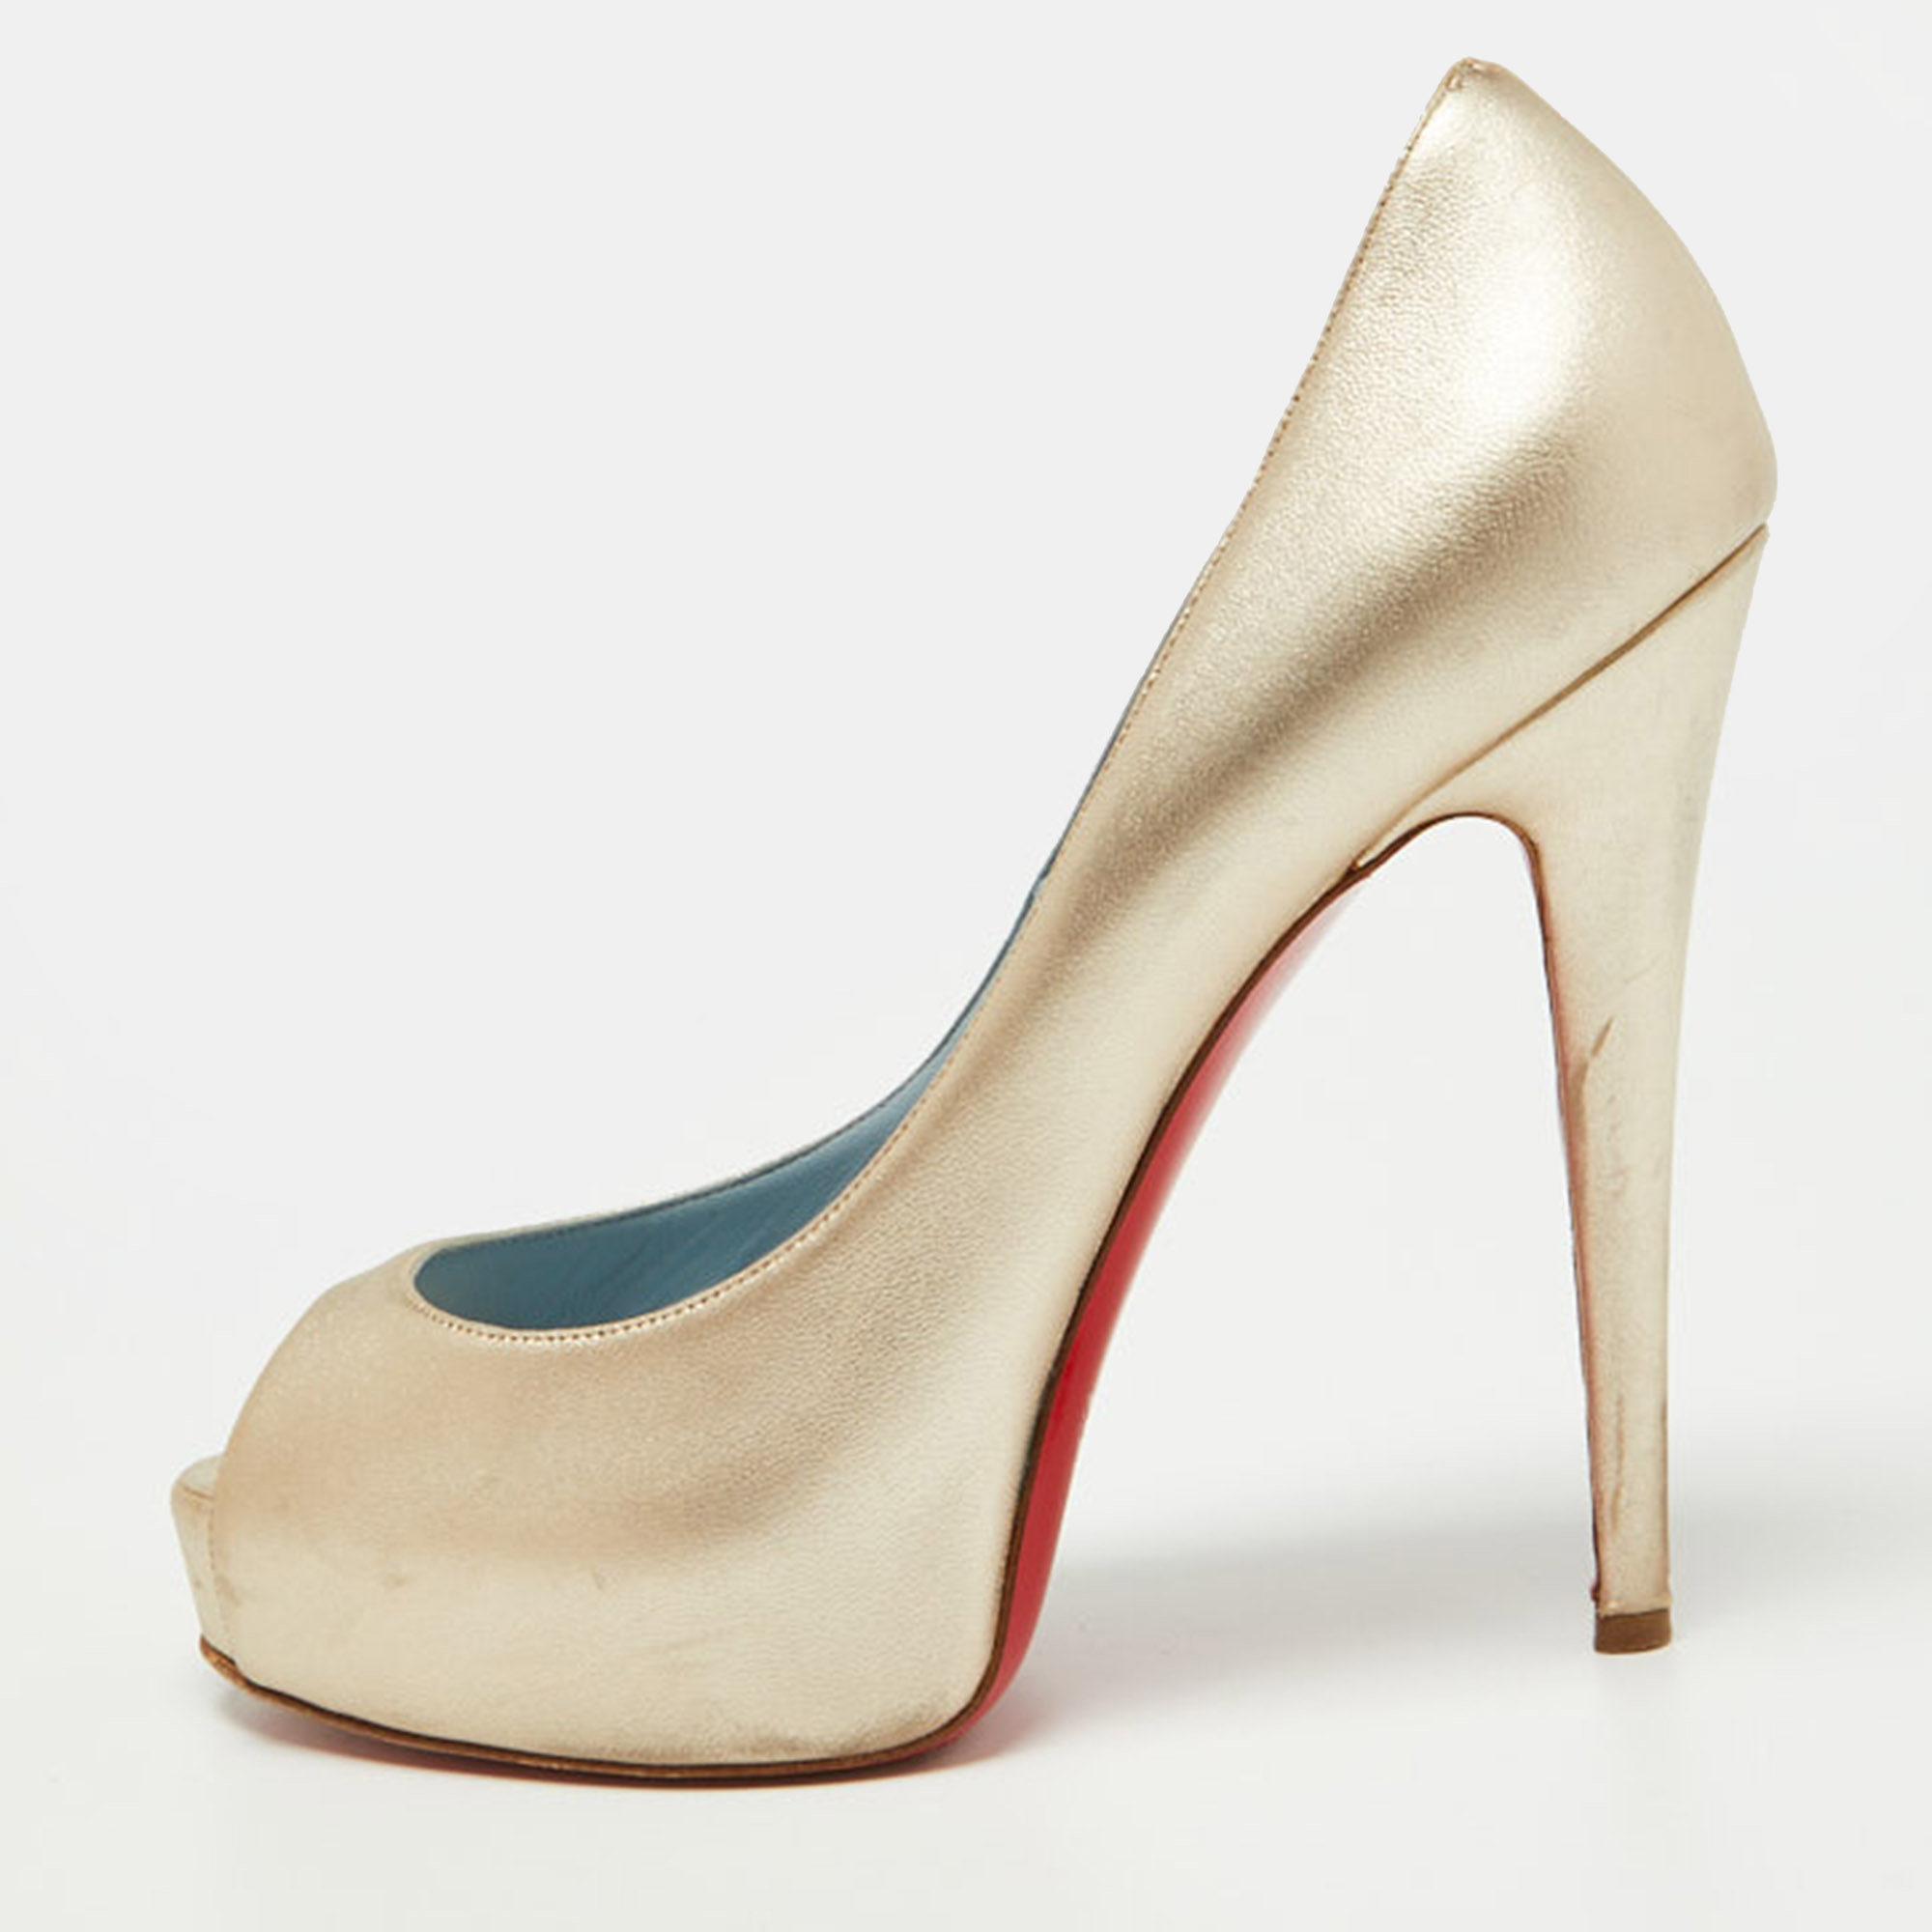 Pre-owned Christian Louboutin Gold Leather Very Prive Pumps Size 38.5